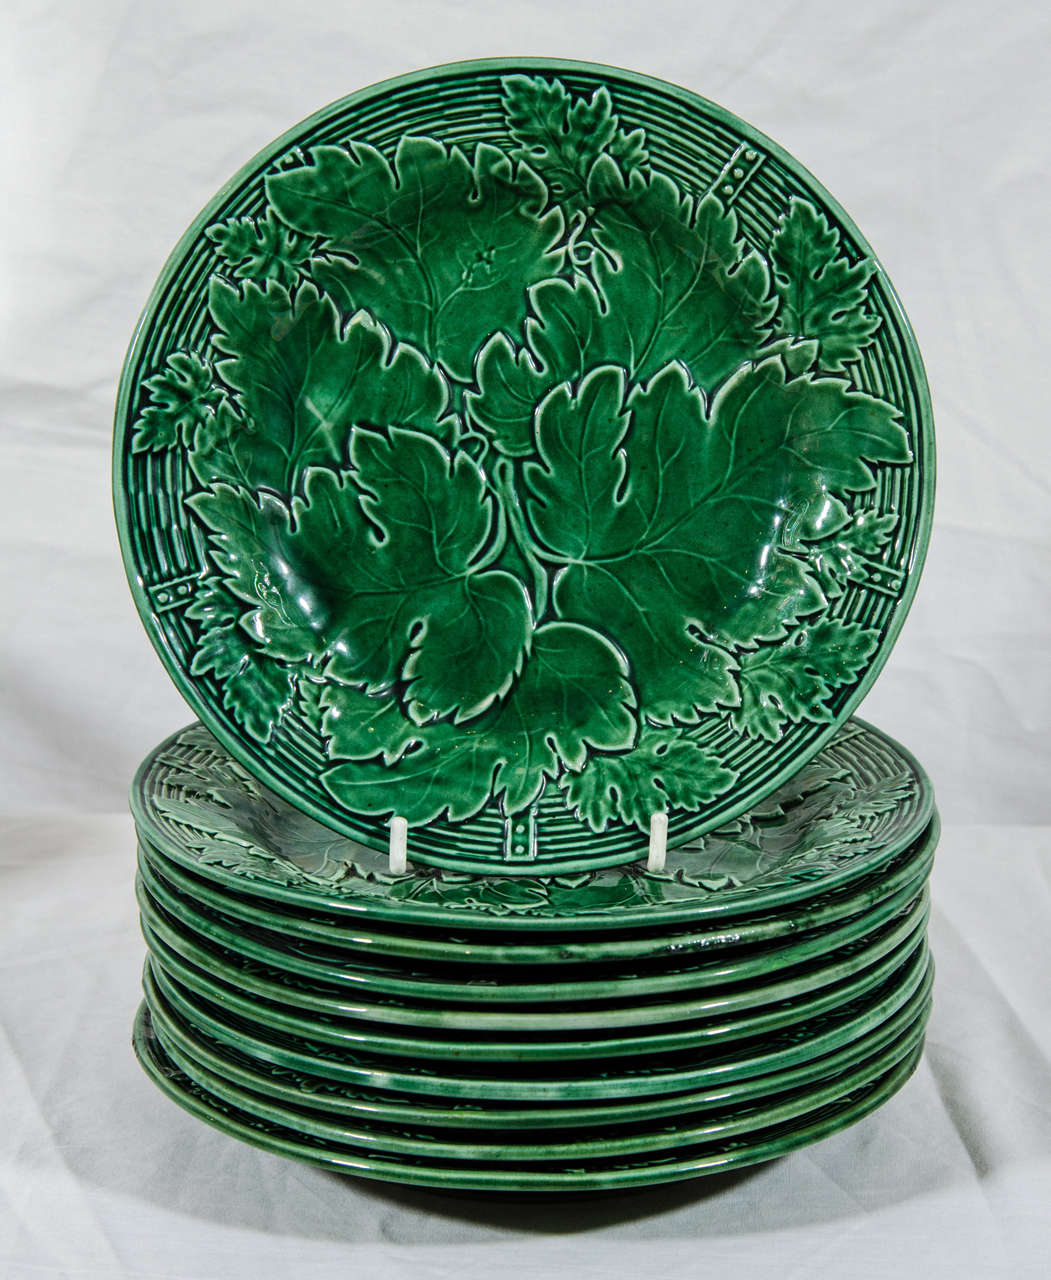 A set of a dozen 19th century English Majolica plates made by Davenport. The detailed design features large impressed oak leaves colored with a light green glaze. The reverse marked with the impressed Davenport anchor.